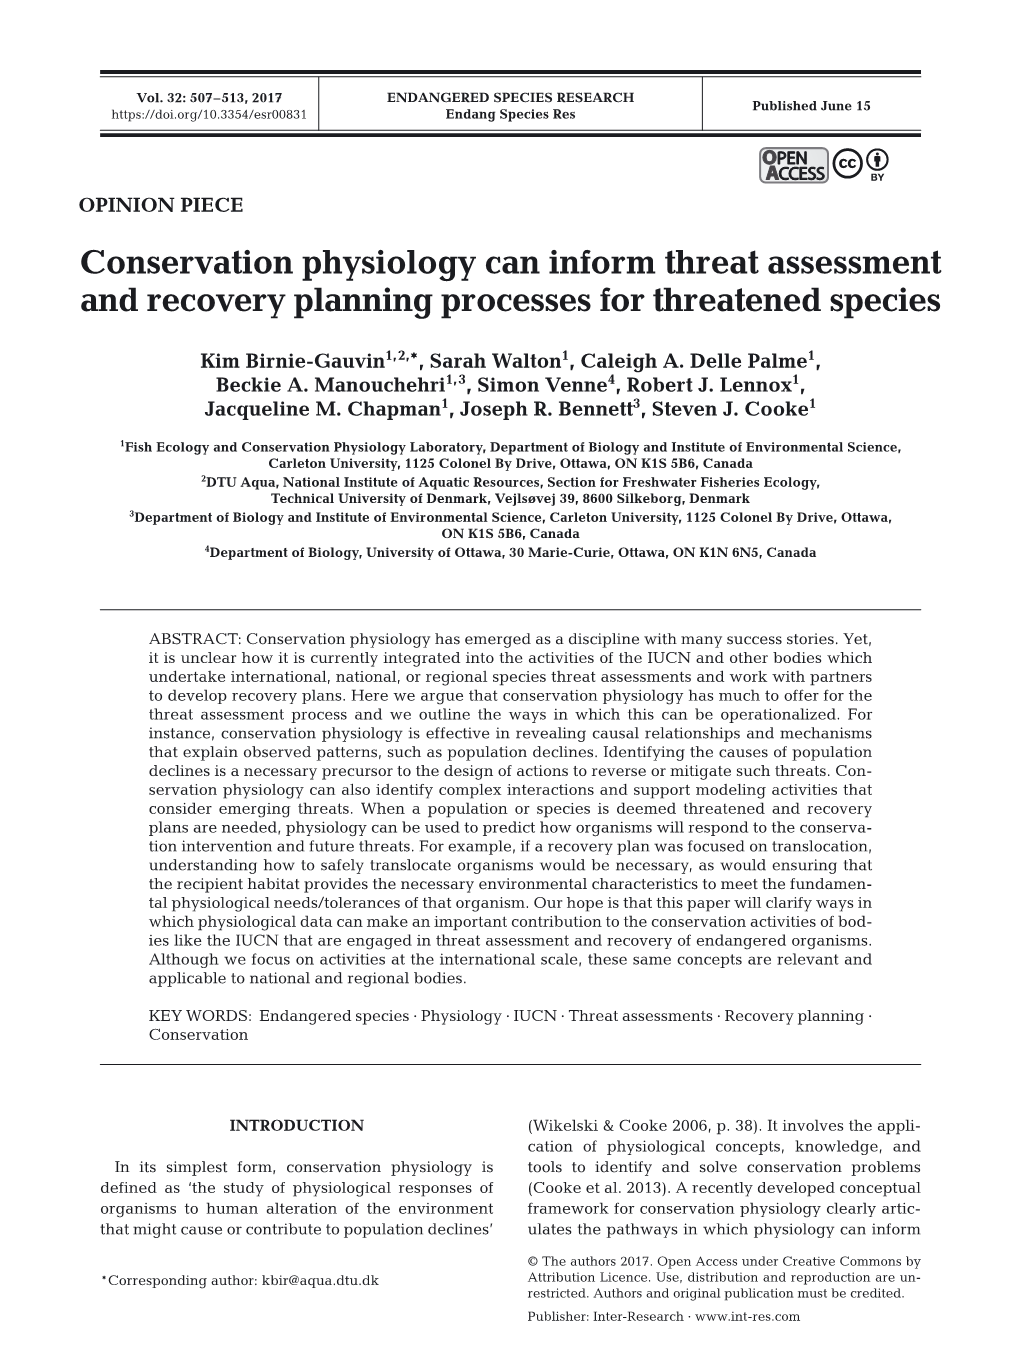 Conservation Physiology Can Inform Threat Assessment and Recovery Planning Processes for Threatened Species